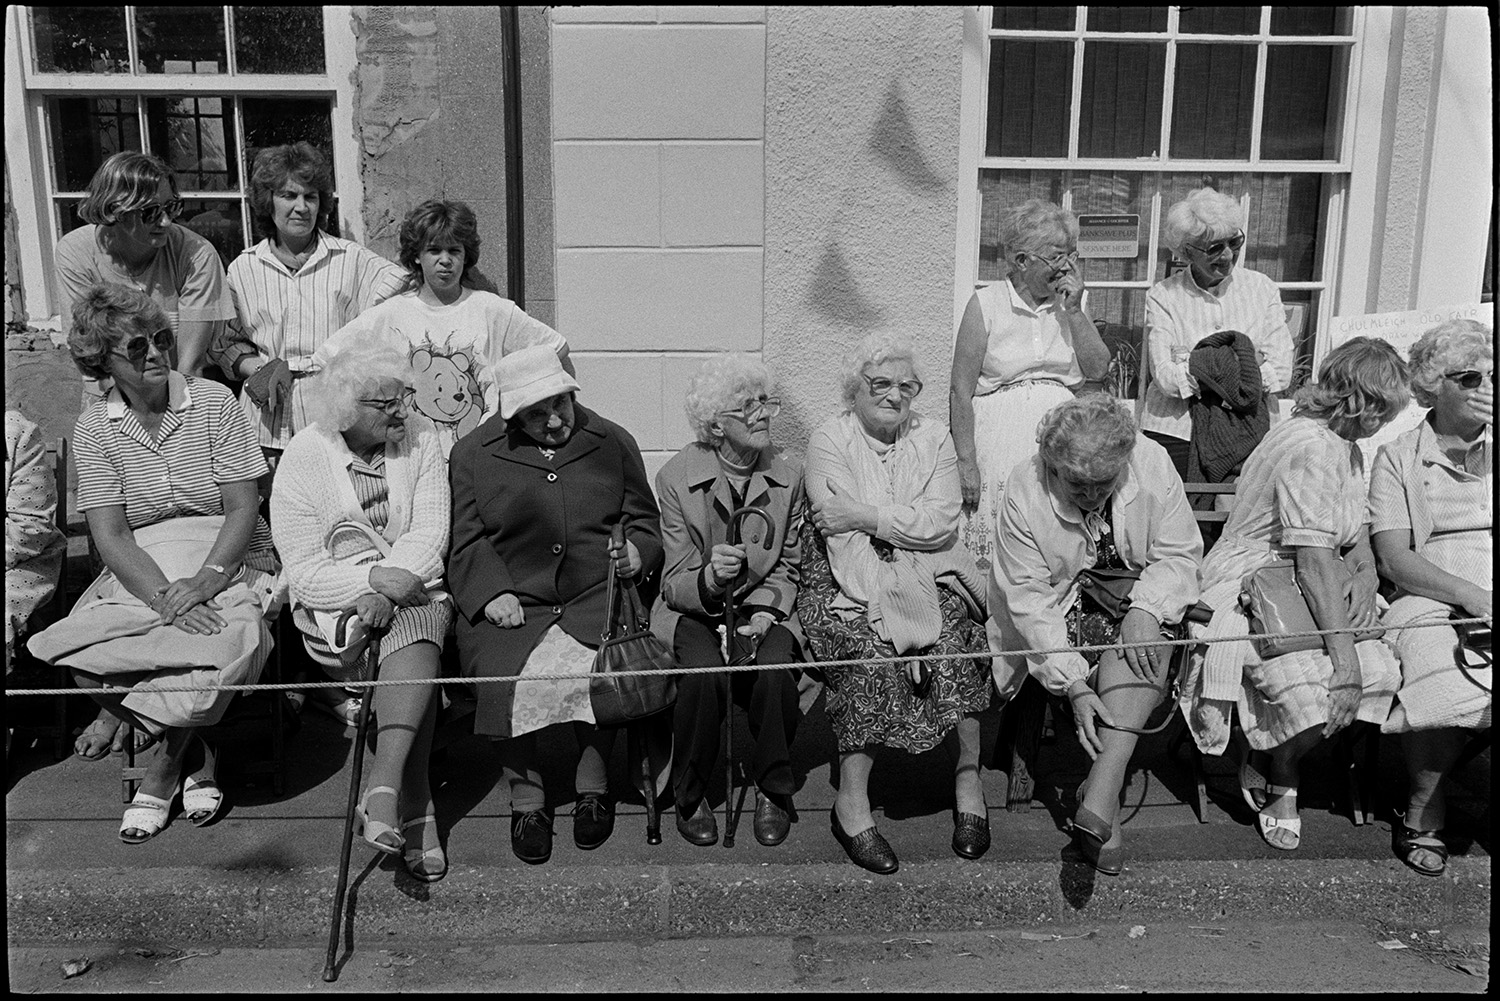 Spectators waiting for start of fair parade.
[Women sitting on seats on the pavement and on windowsills, waiting for parade in Fore Street, Chulmleigh during Chulmleigh Fair.]